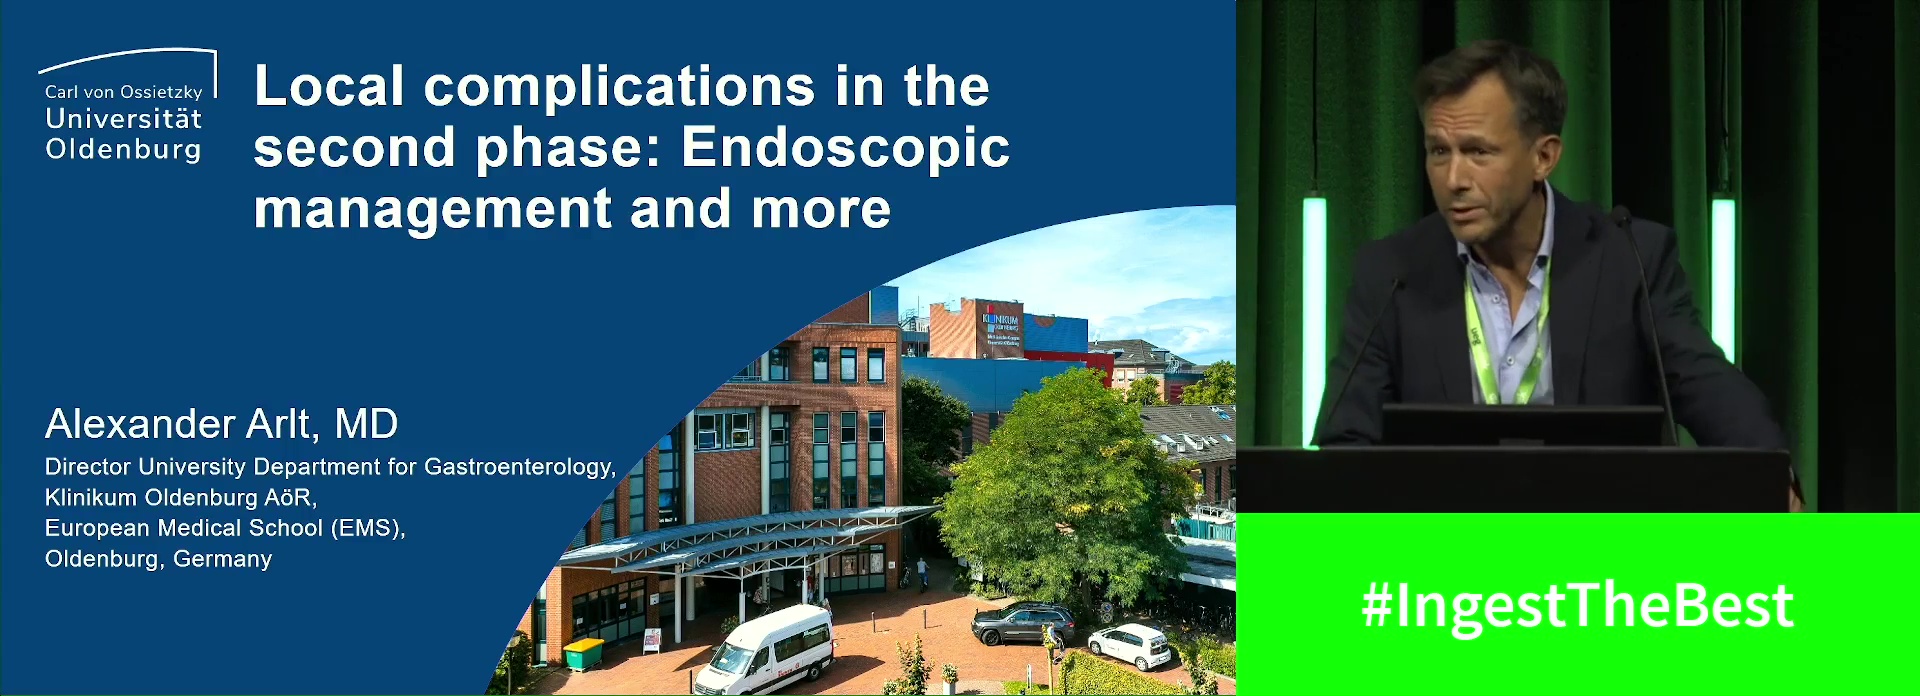 Local complications in the second phase: Endoscopic management and more